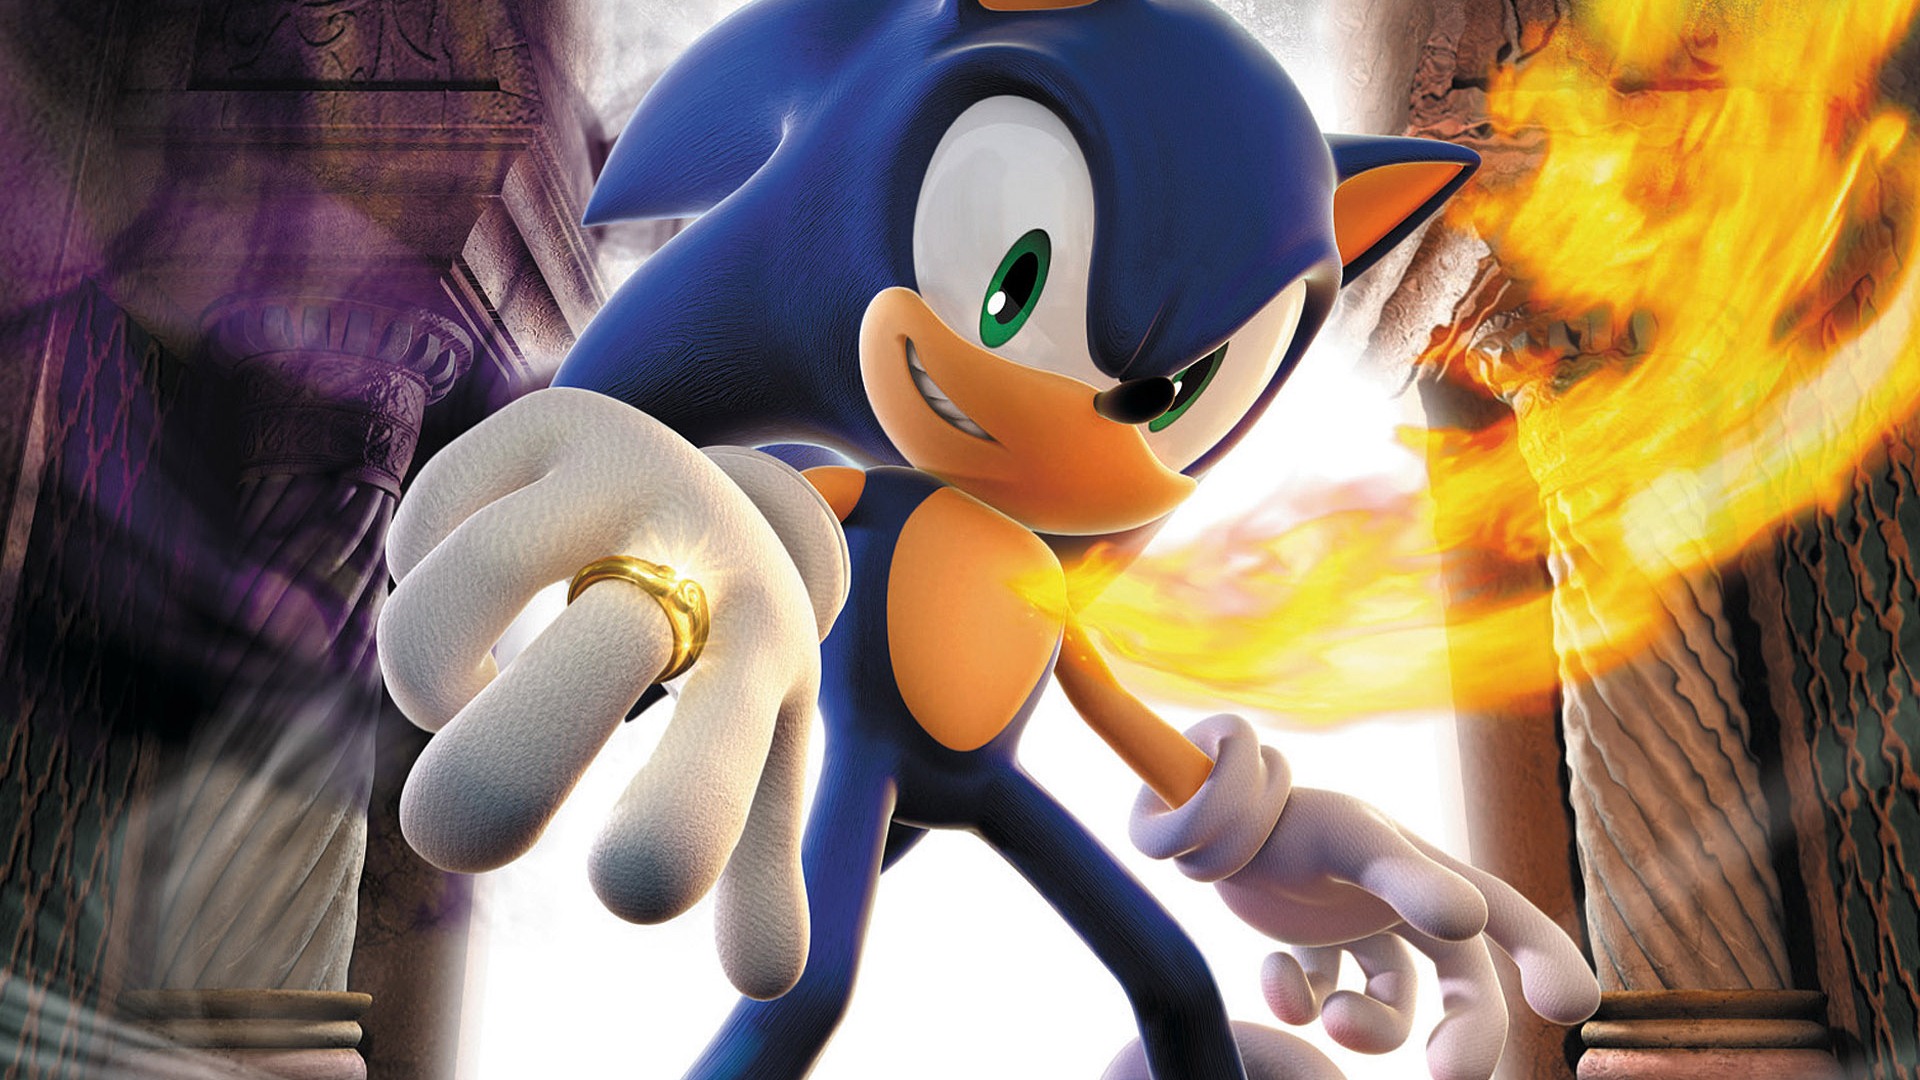 Sonic HD wallpapers #3 - 1920x1080